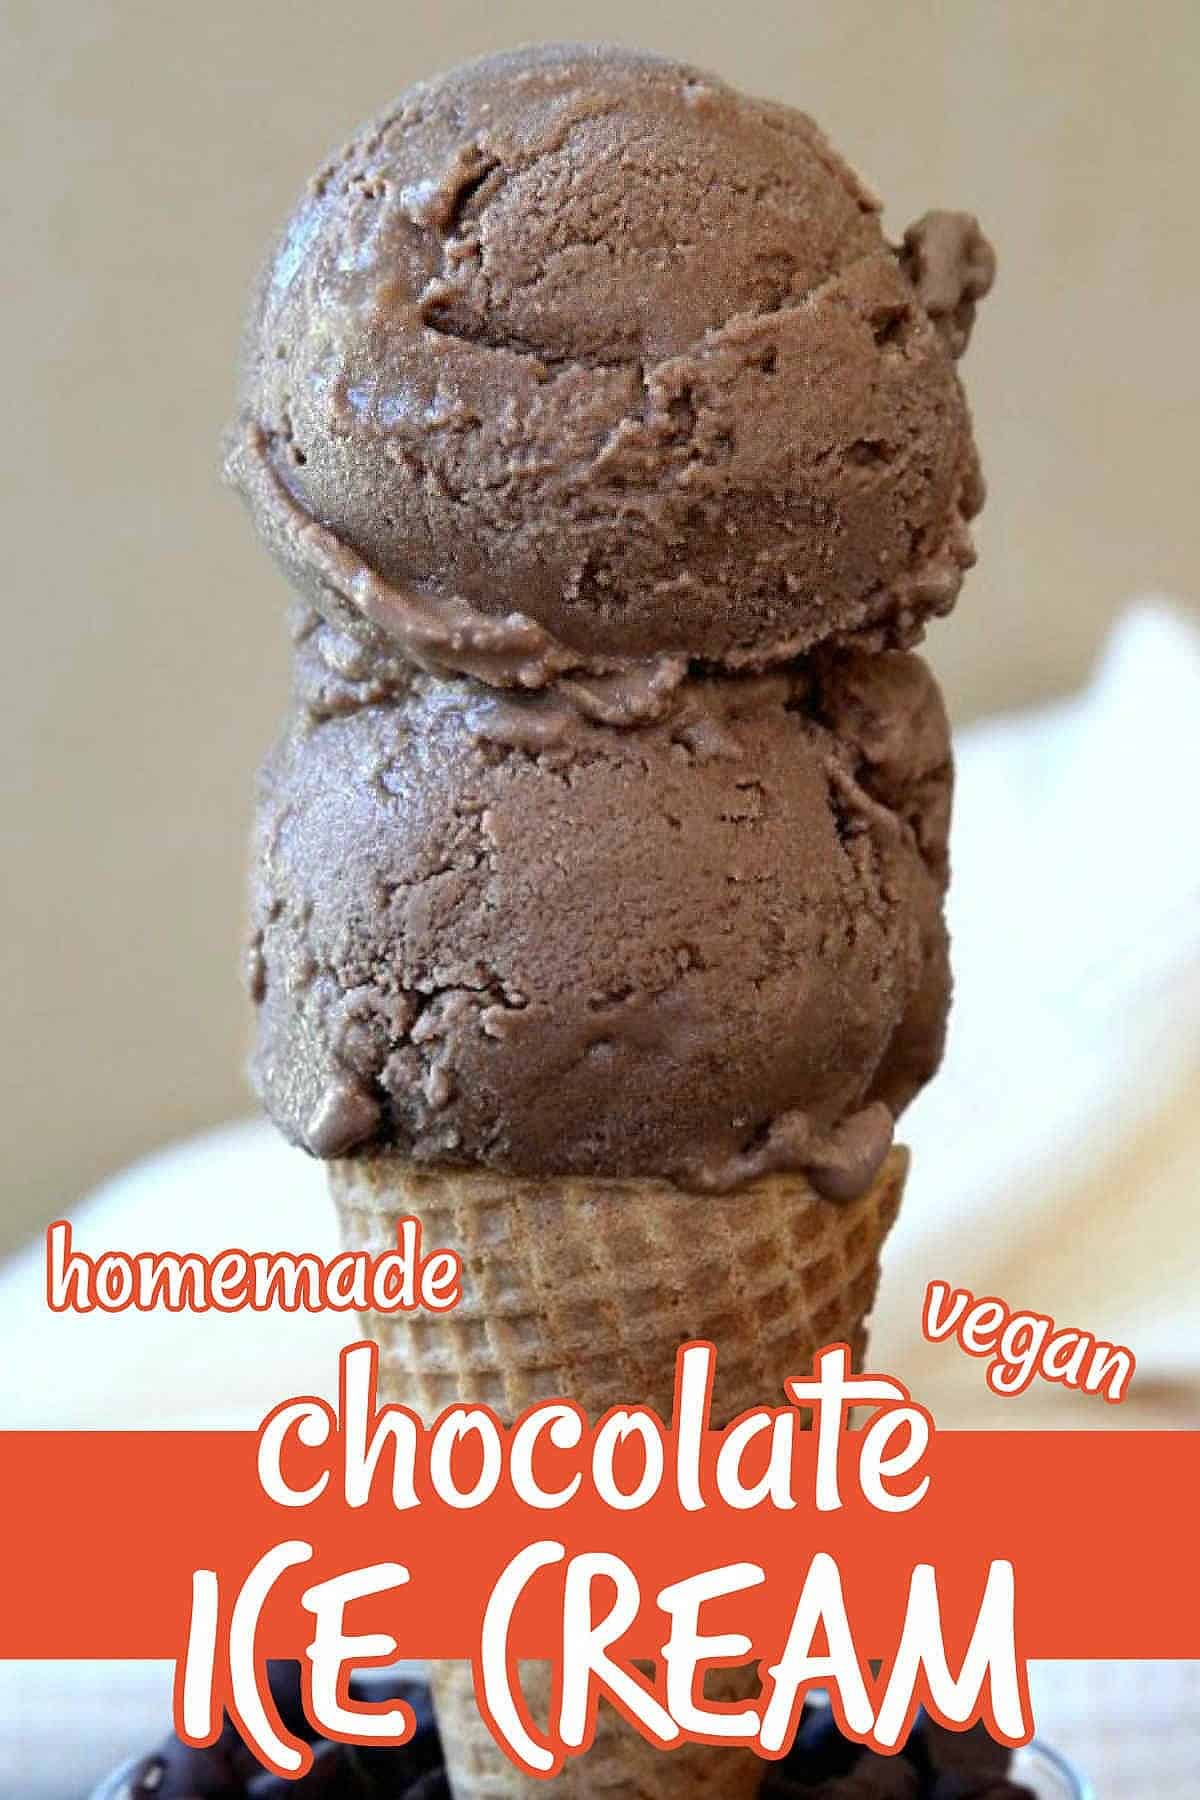 Two scoops of vegan chocolate ice cream on a cone and standing in a glass of chocolate chips. Text below for pinning